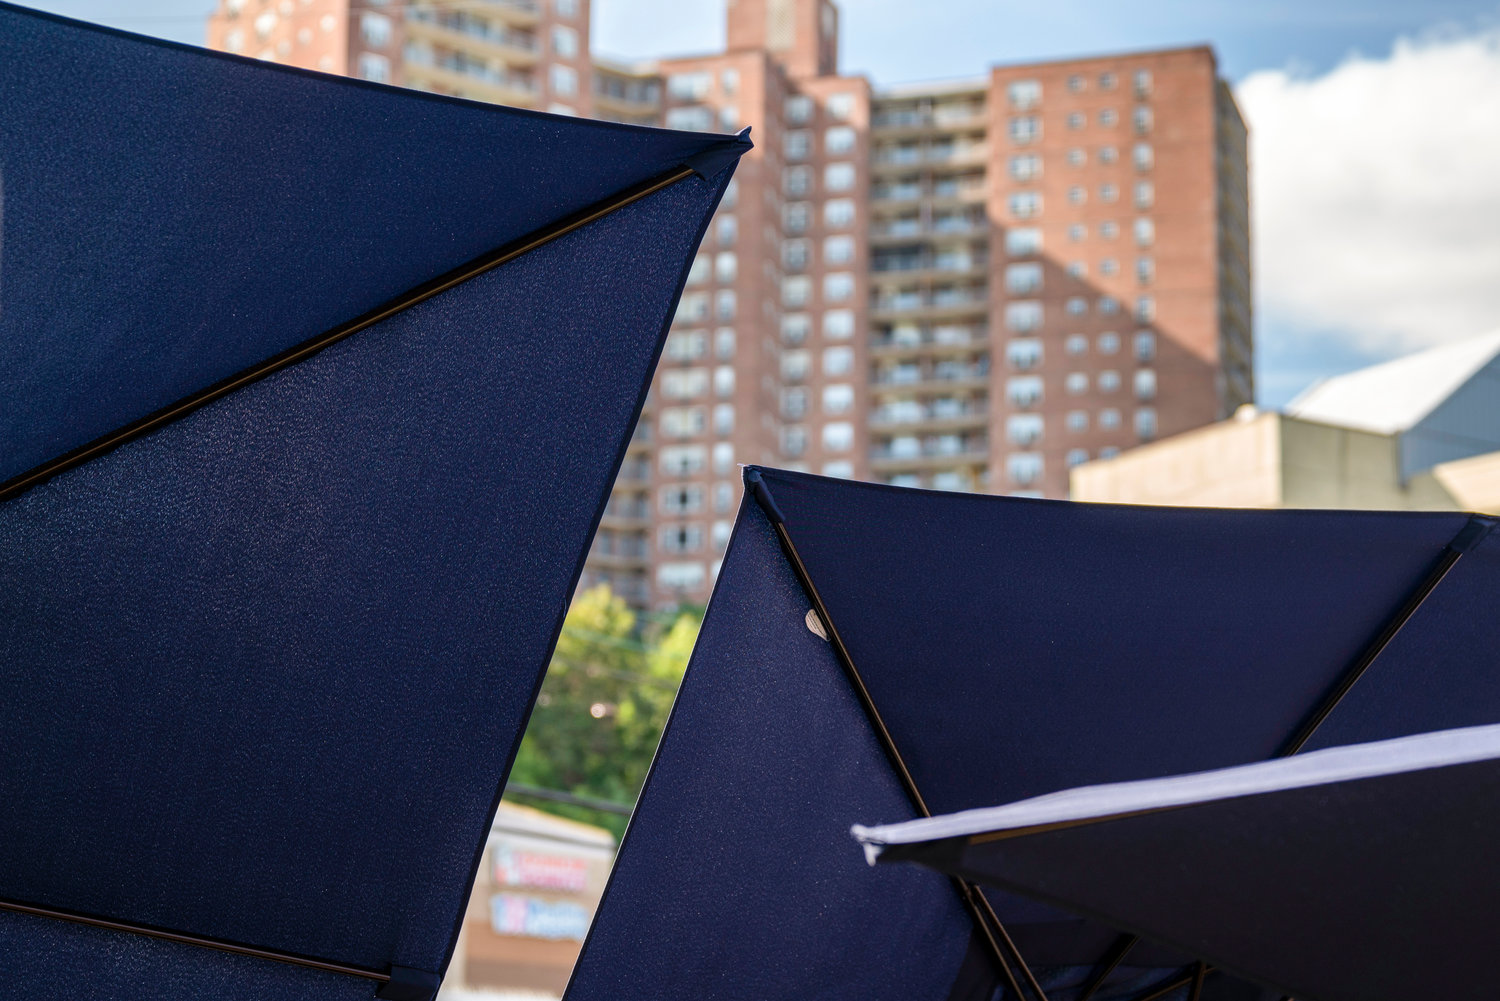 Structures for outdoor dining can be as simple as umbrellas on tabletops, or wood builds that require no permit or municipal oversight. A common sight since the start of the coronavirus pandemic, the city’s transportation department is exploring the possibility of making such offerings permanent.